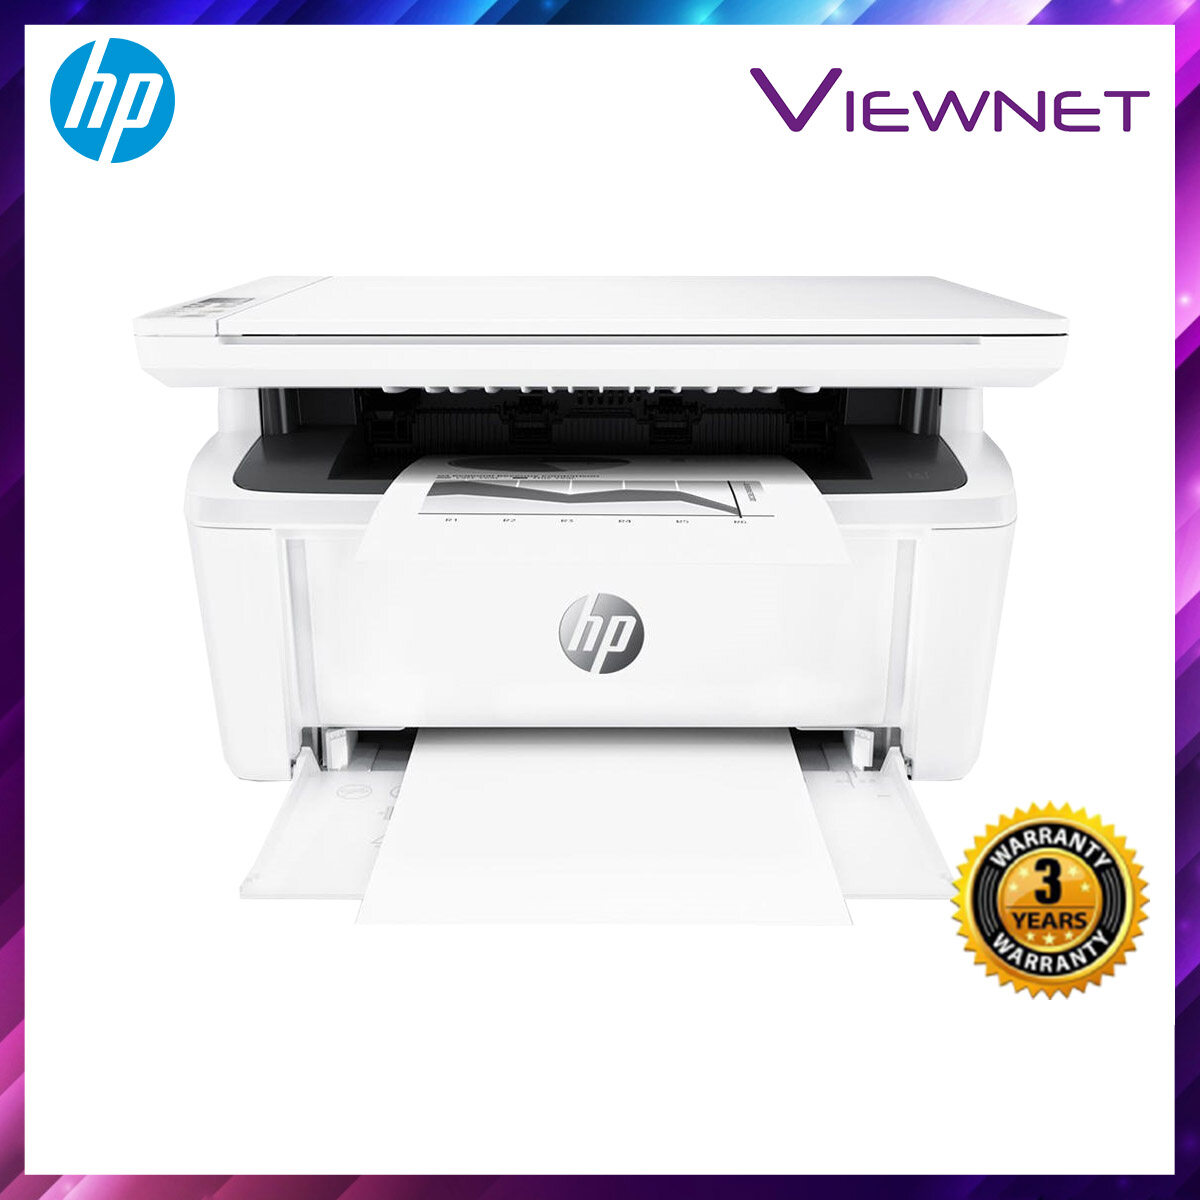 HP LASERJET PRO MFP M28W PRINTER PRINT, SCAN, COPY, WIRELESS 3 Years Onsite Warranty with 1-to-1 Unit exchange **NEED TO ONLINE REGISTER**